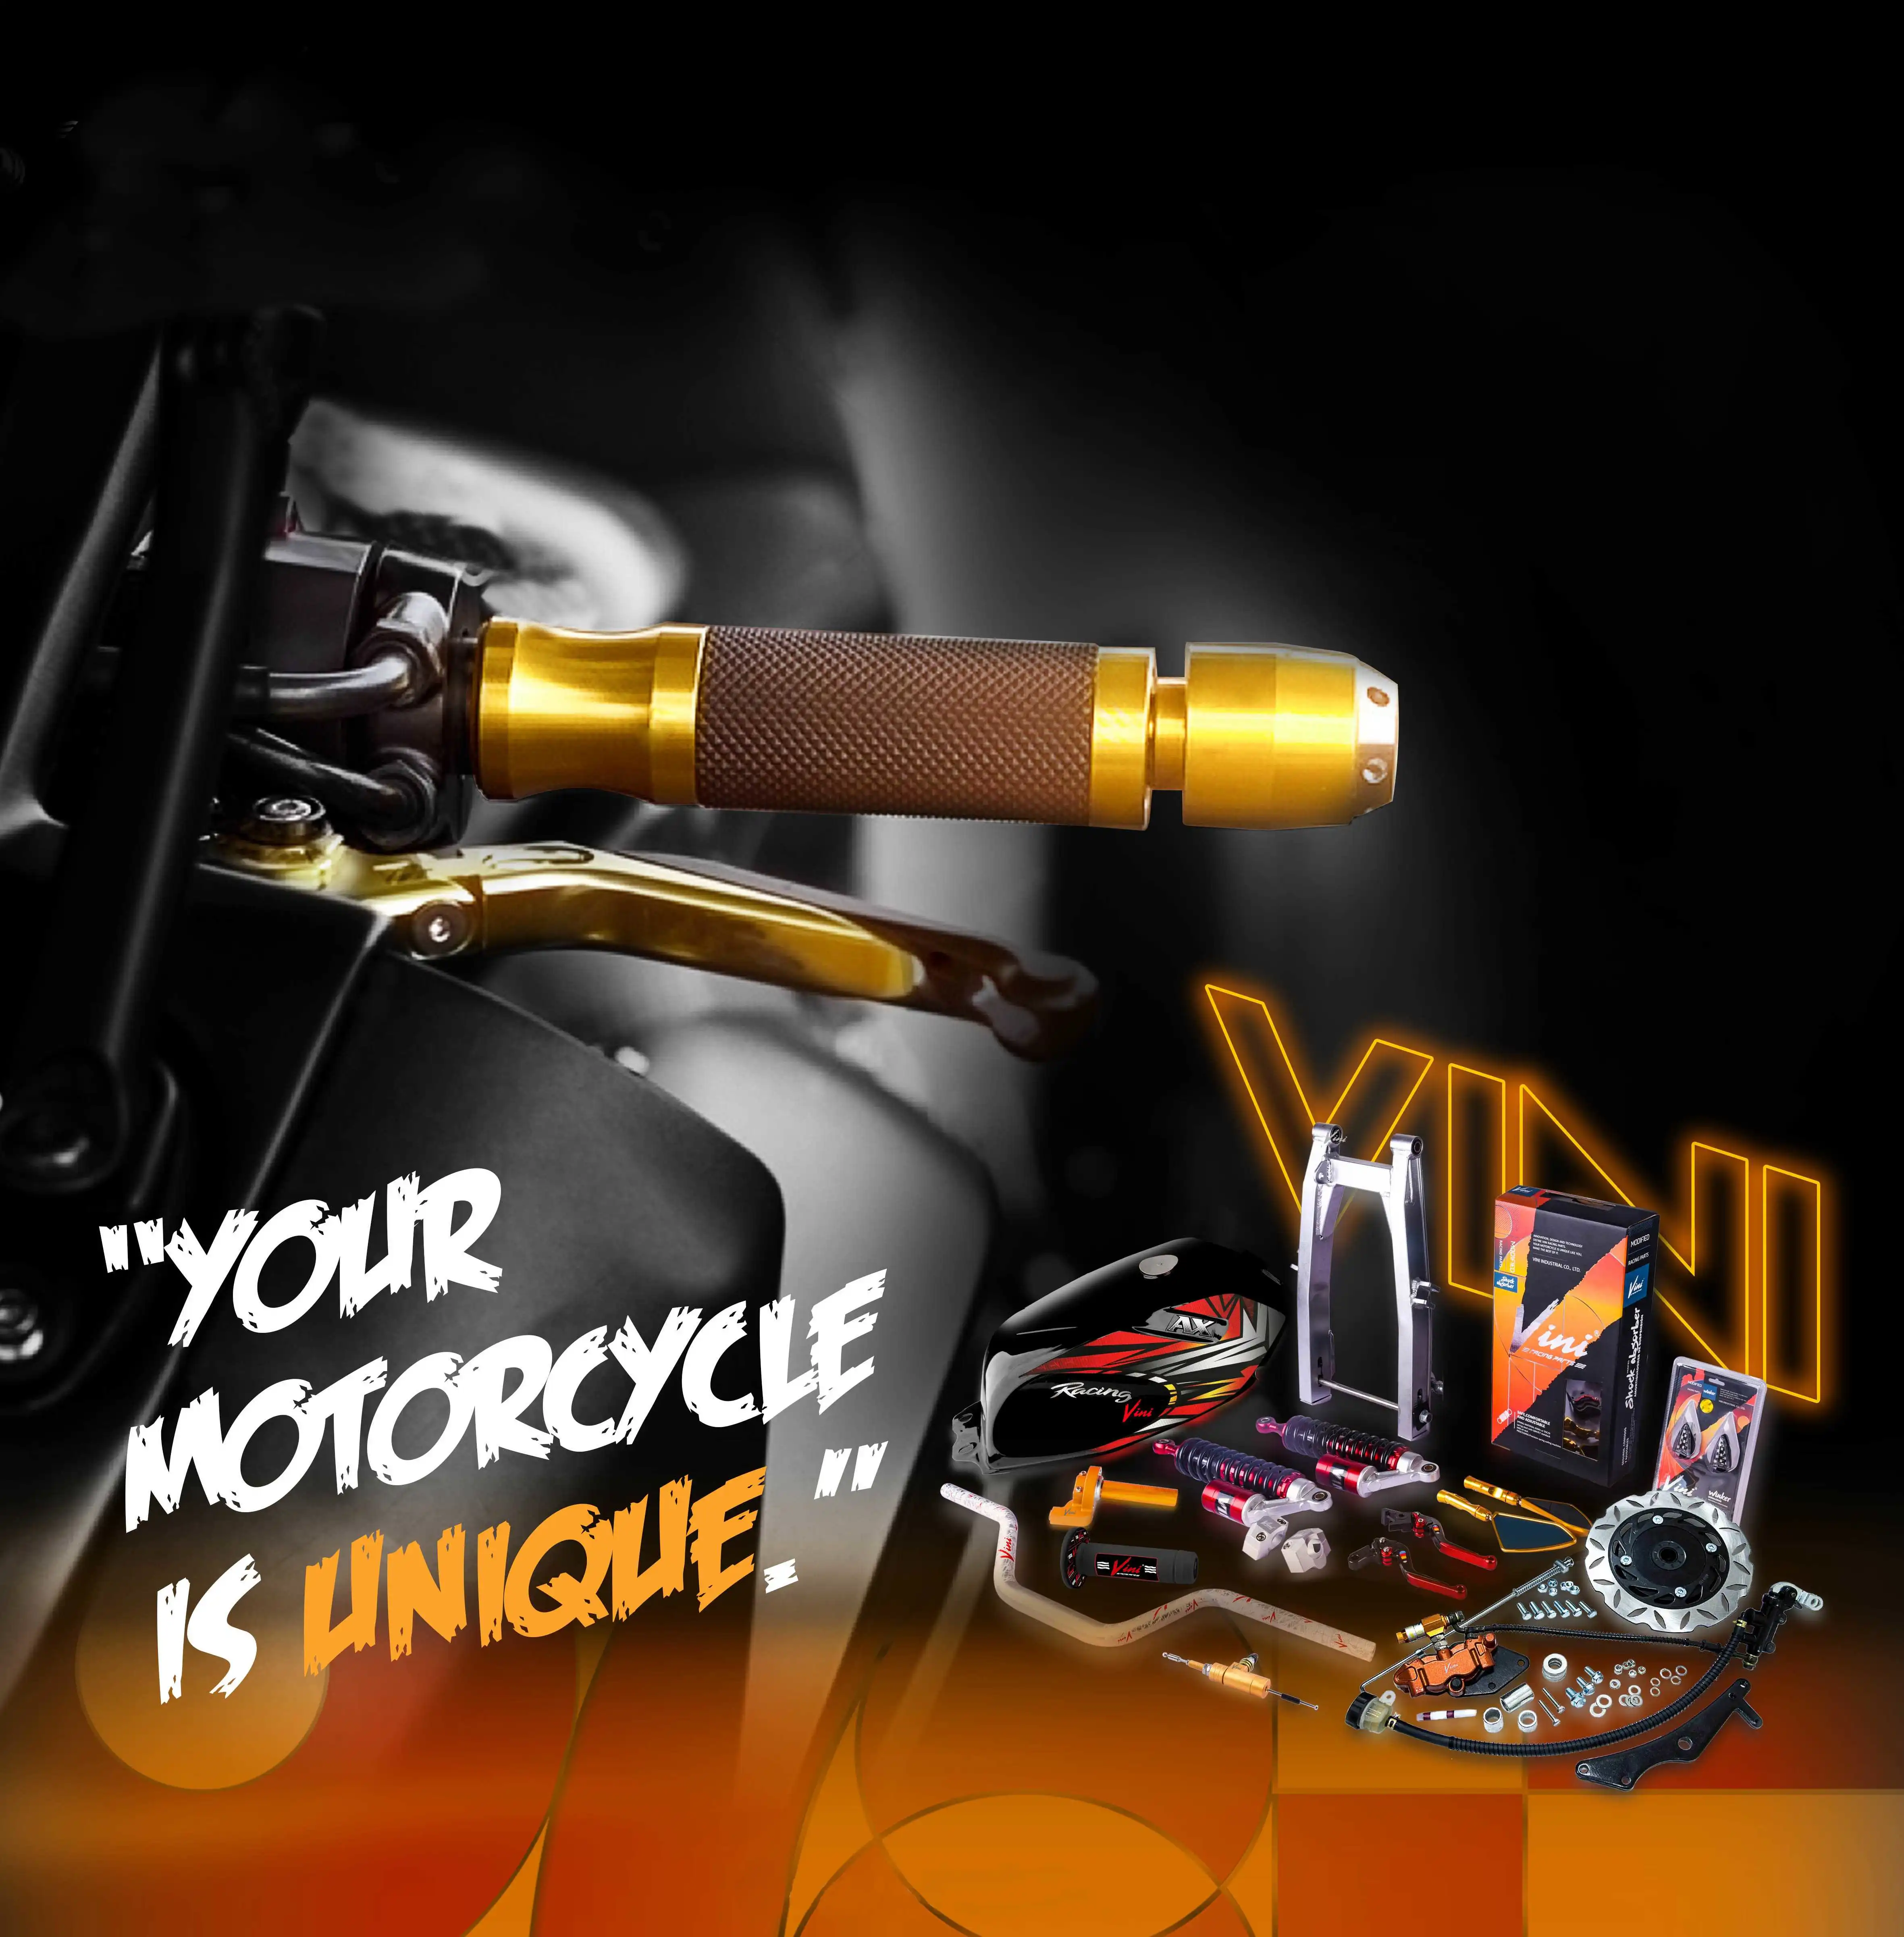 Motorcycle Accessories: Everything You Need for Your Motorcycle